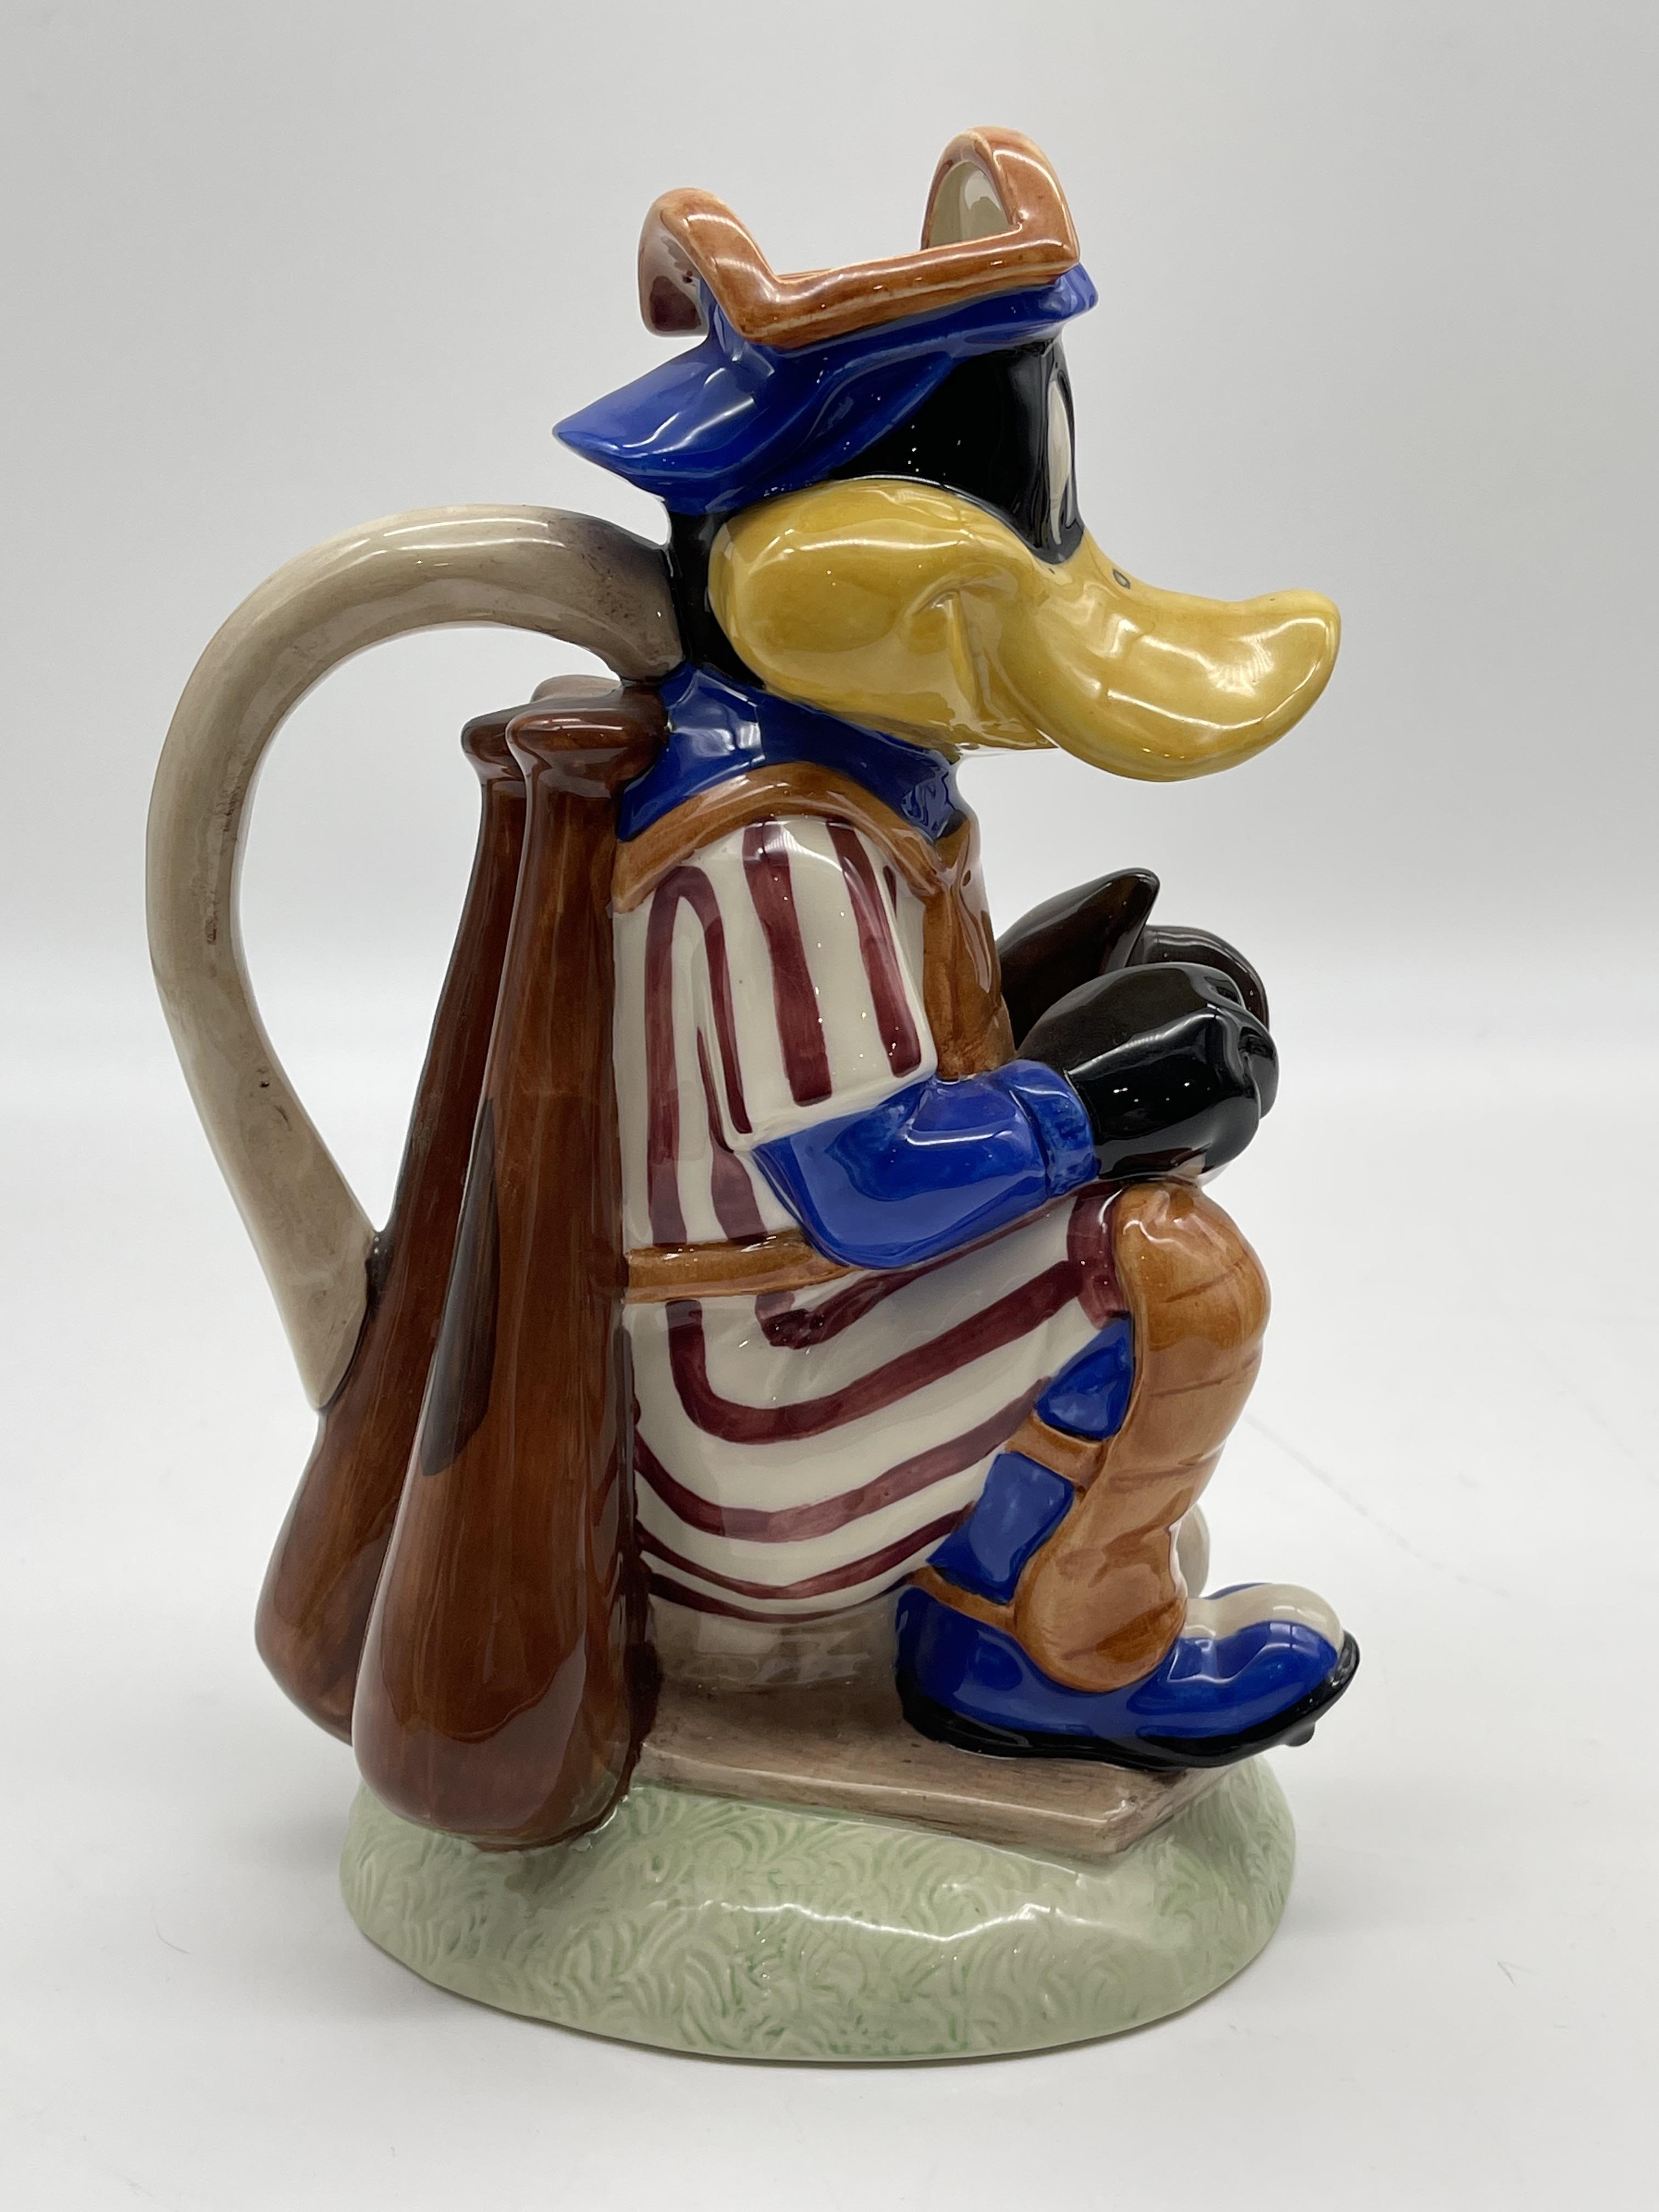 Five Limited Edition Kevin Francis Character Jugs - Image 11 of 32